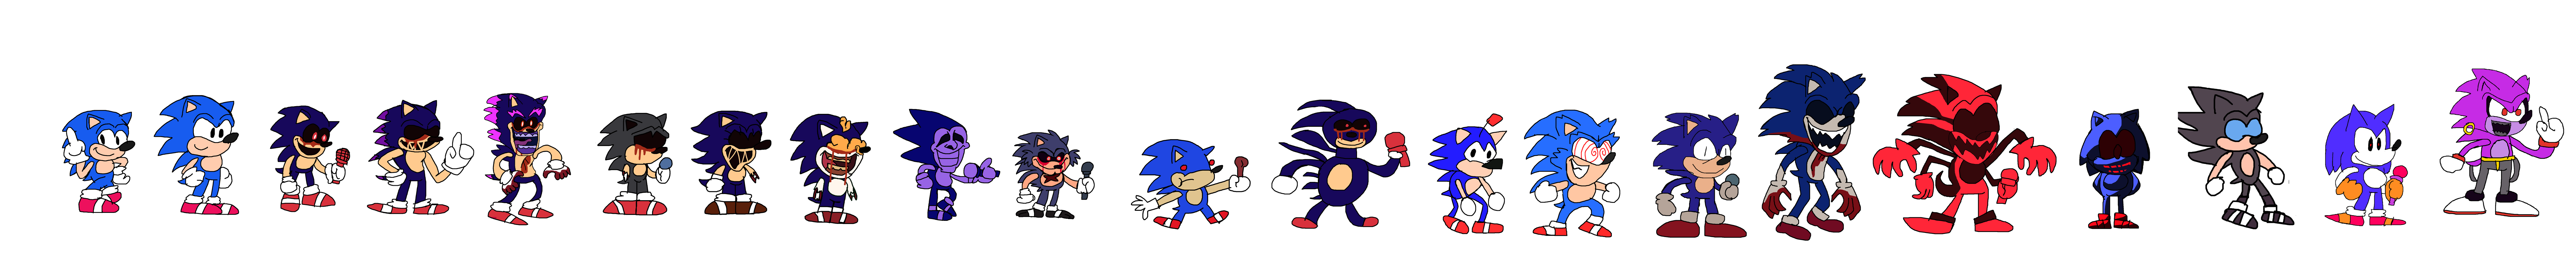 Drawing - Sonic.EXE, Majin Sonic and Lord X Styled by Abbysek on